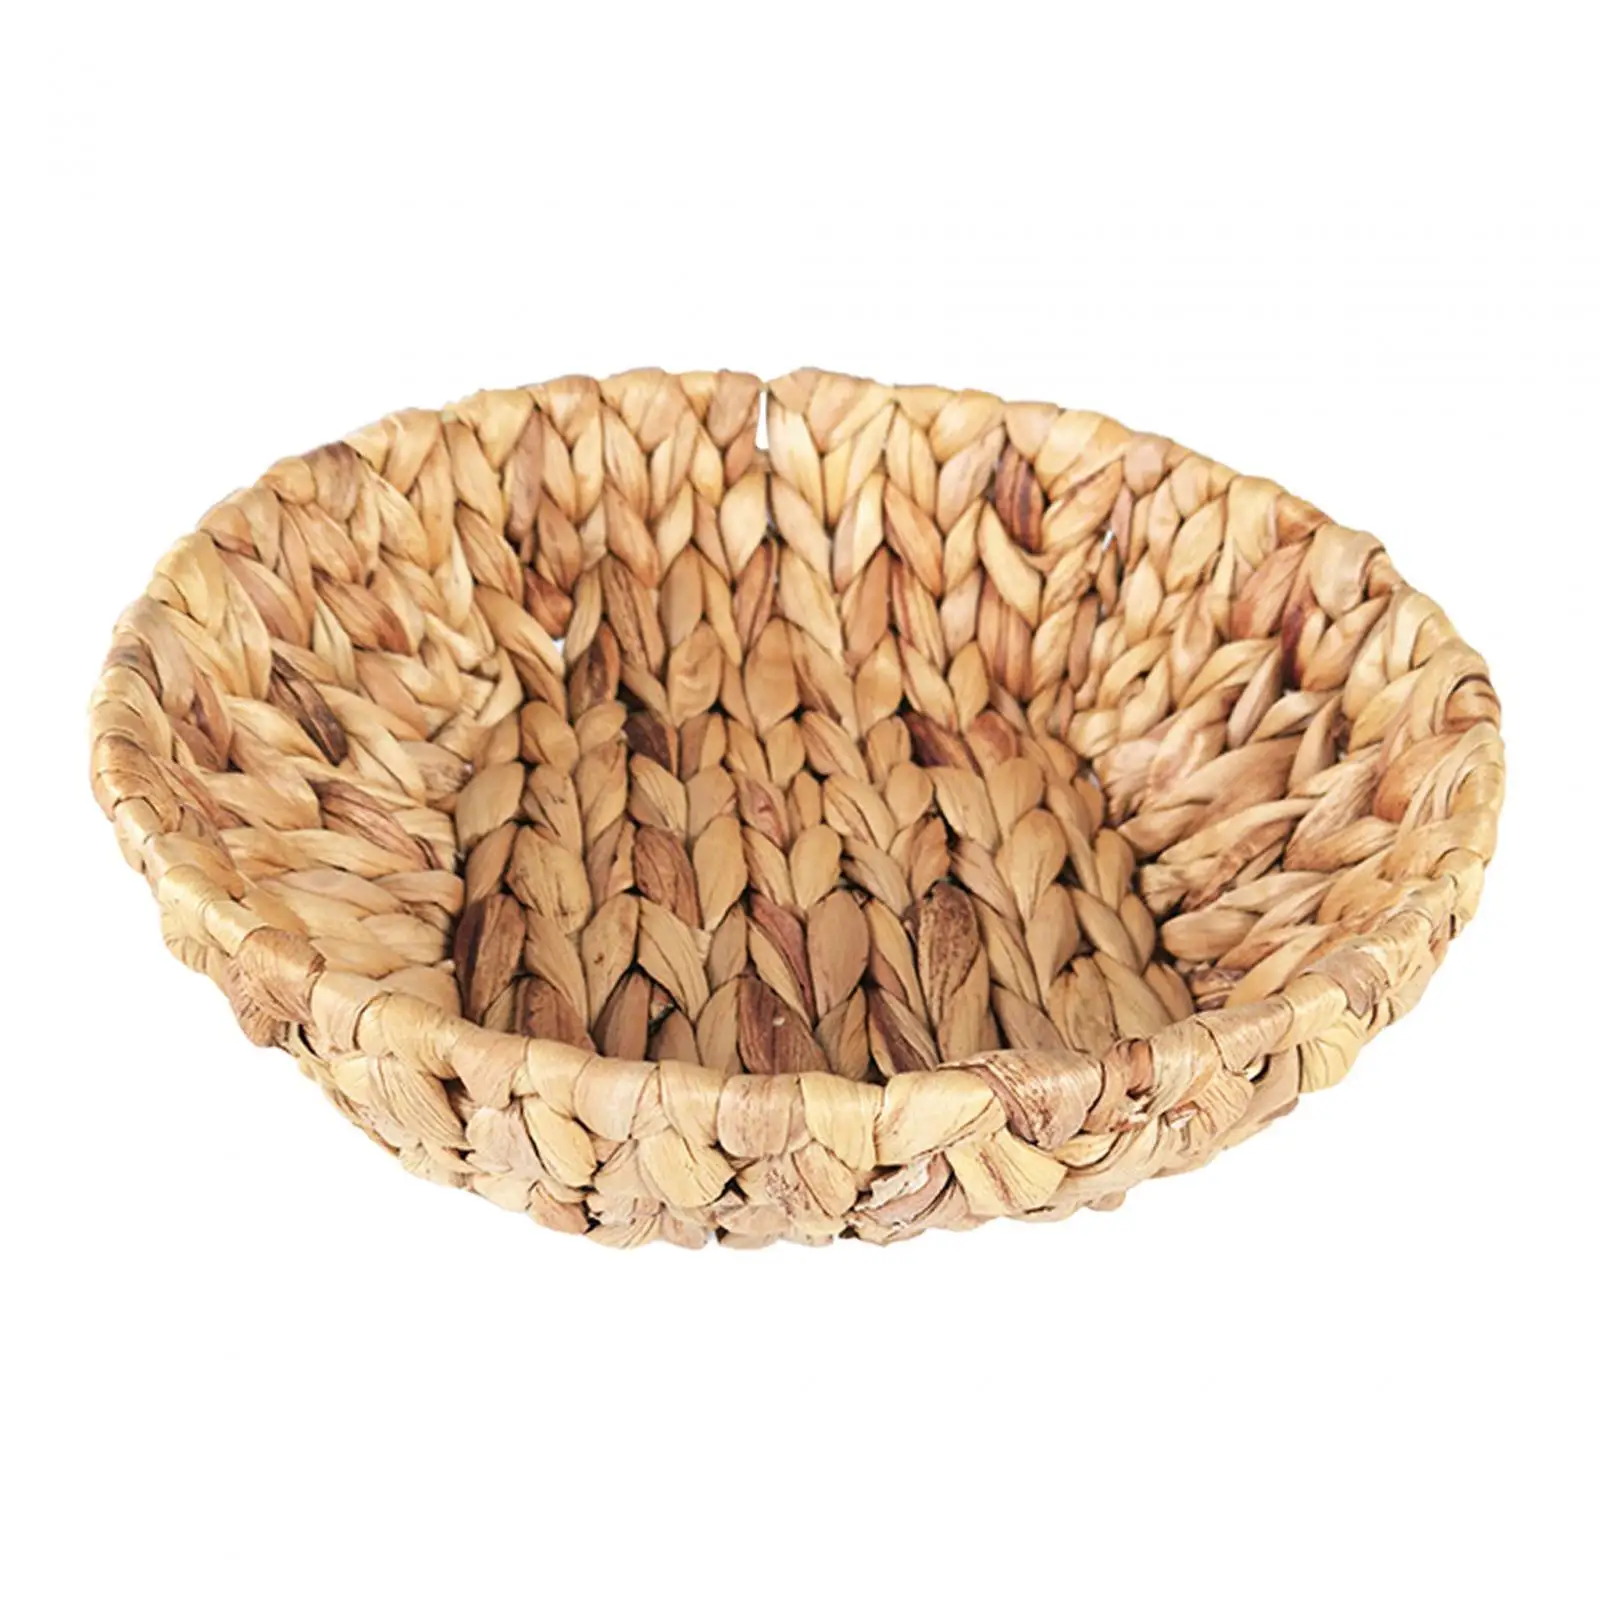 Snack Candy Storage Basket Water Hyacinth Storage Basket for Arts and Crafts Bread Dinner Tea Party Breakfast